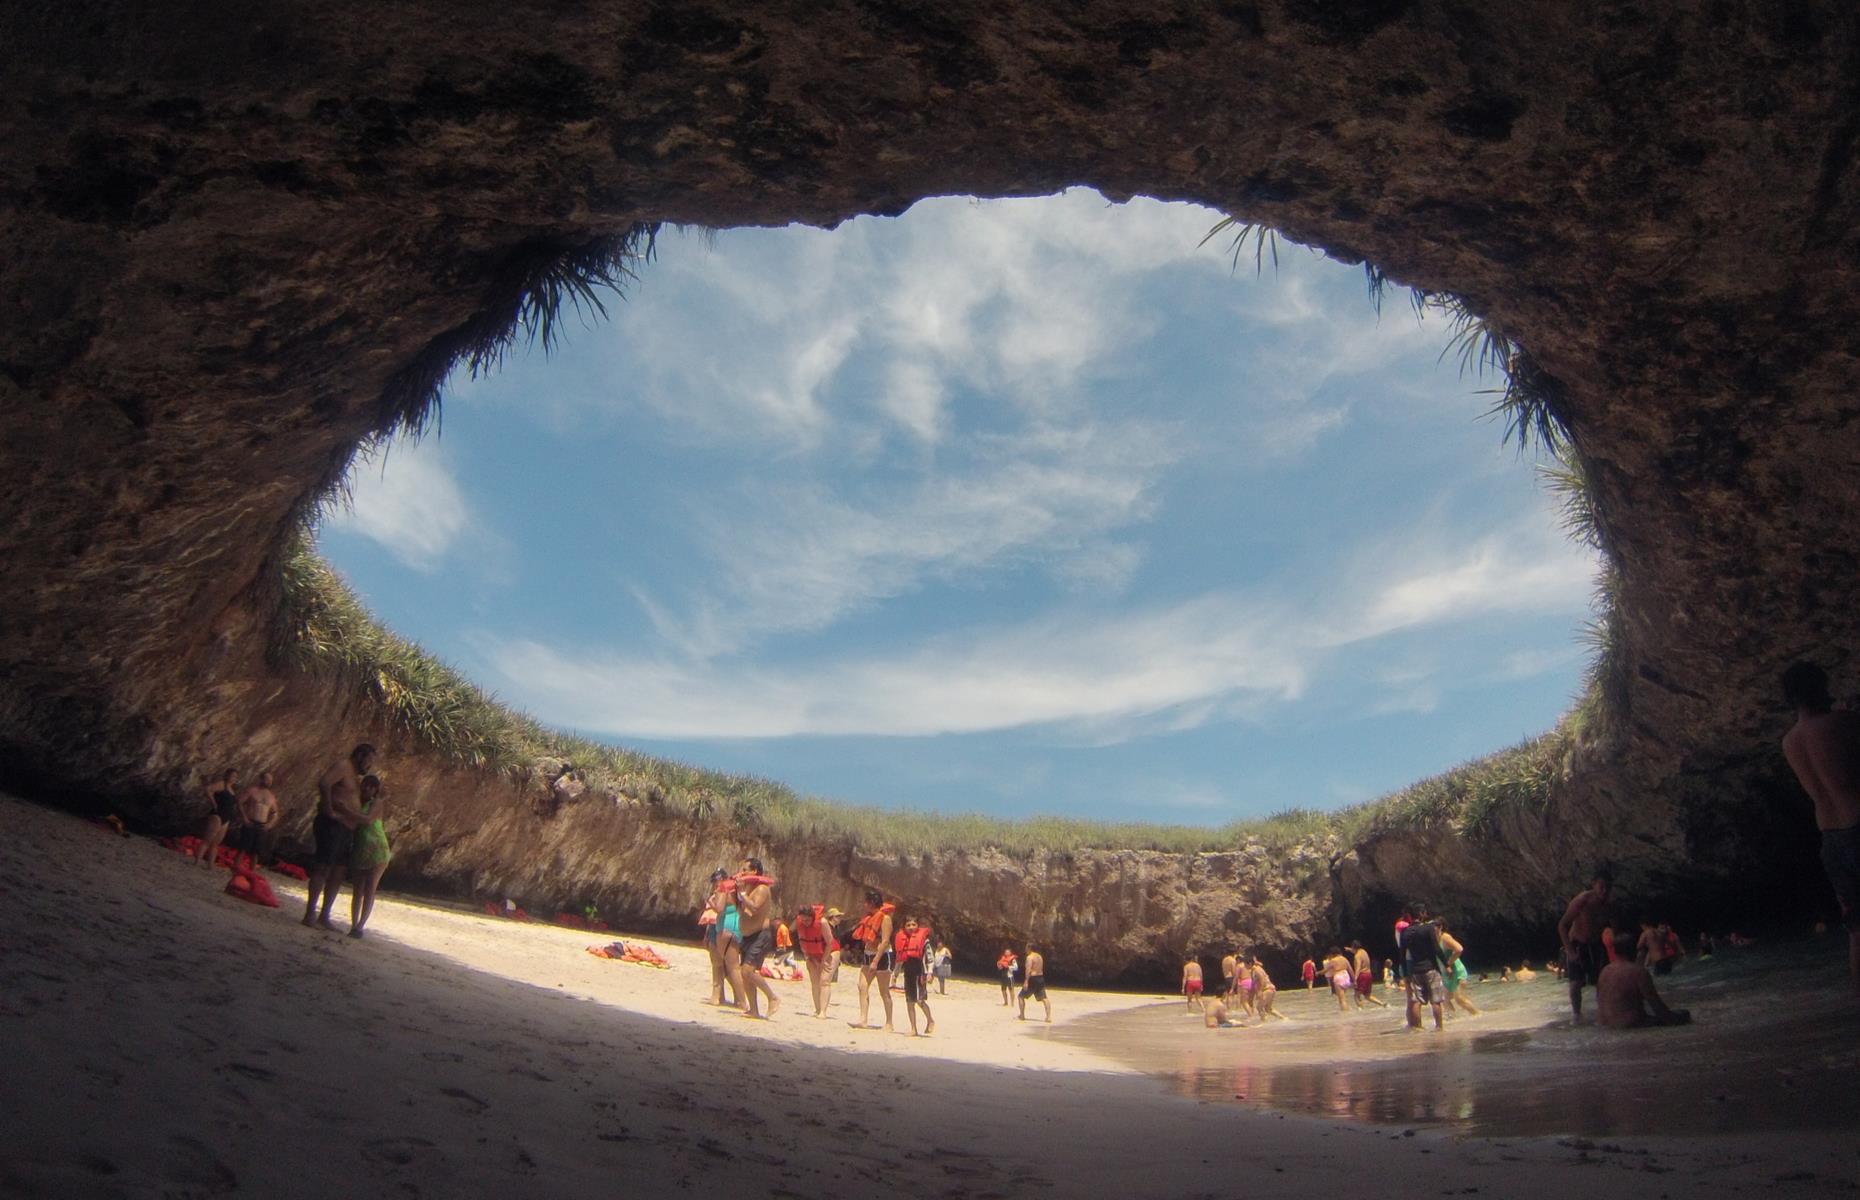 Mexico’s Hidden Beach is one of the country’s most spectacular stretches of sand. Located on the Marietas Islands, off the coast of Puerto Vallarta, it can only be reached by swimming or kayaking through an underwater tunnel. It’s believed this natural sunroof may have been caused by bombing during WWI.